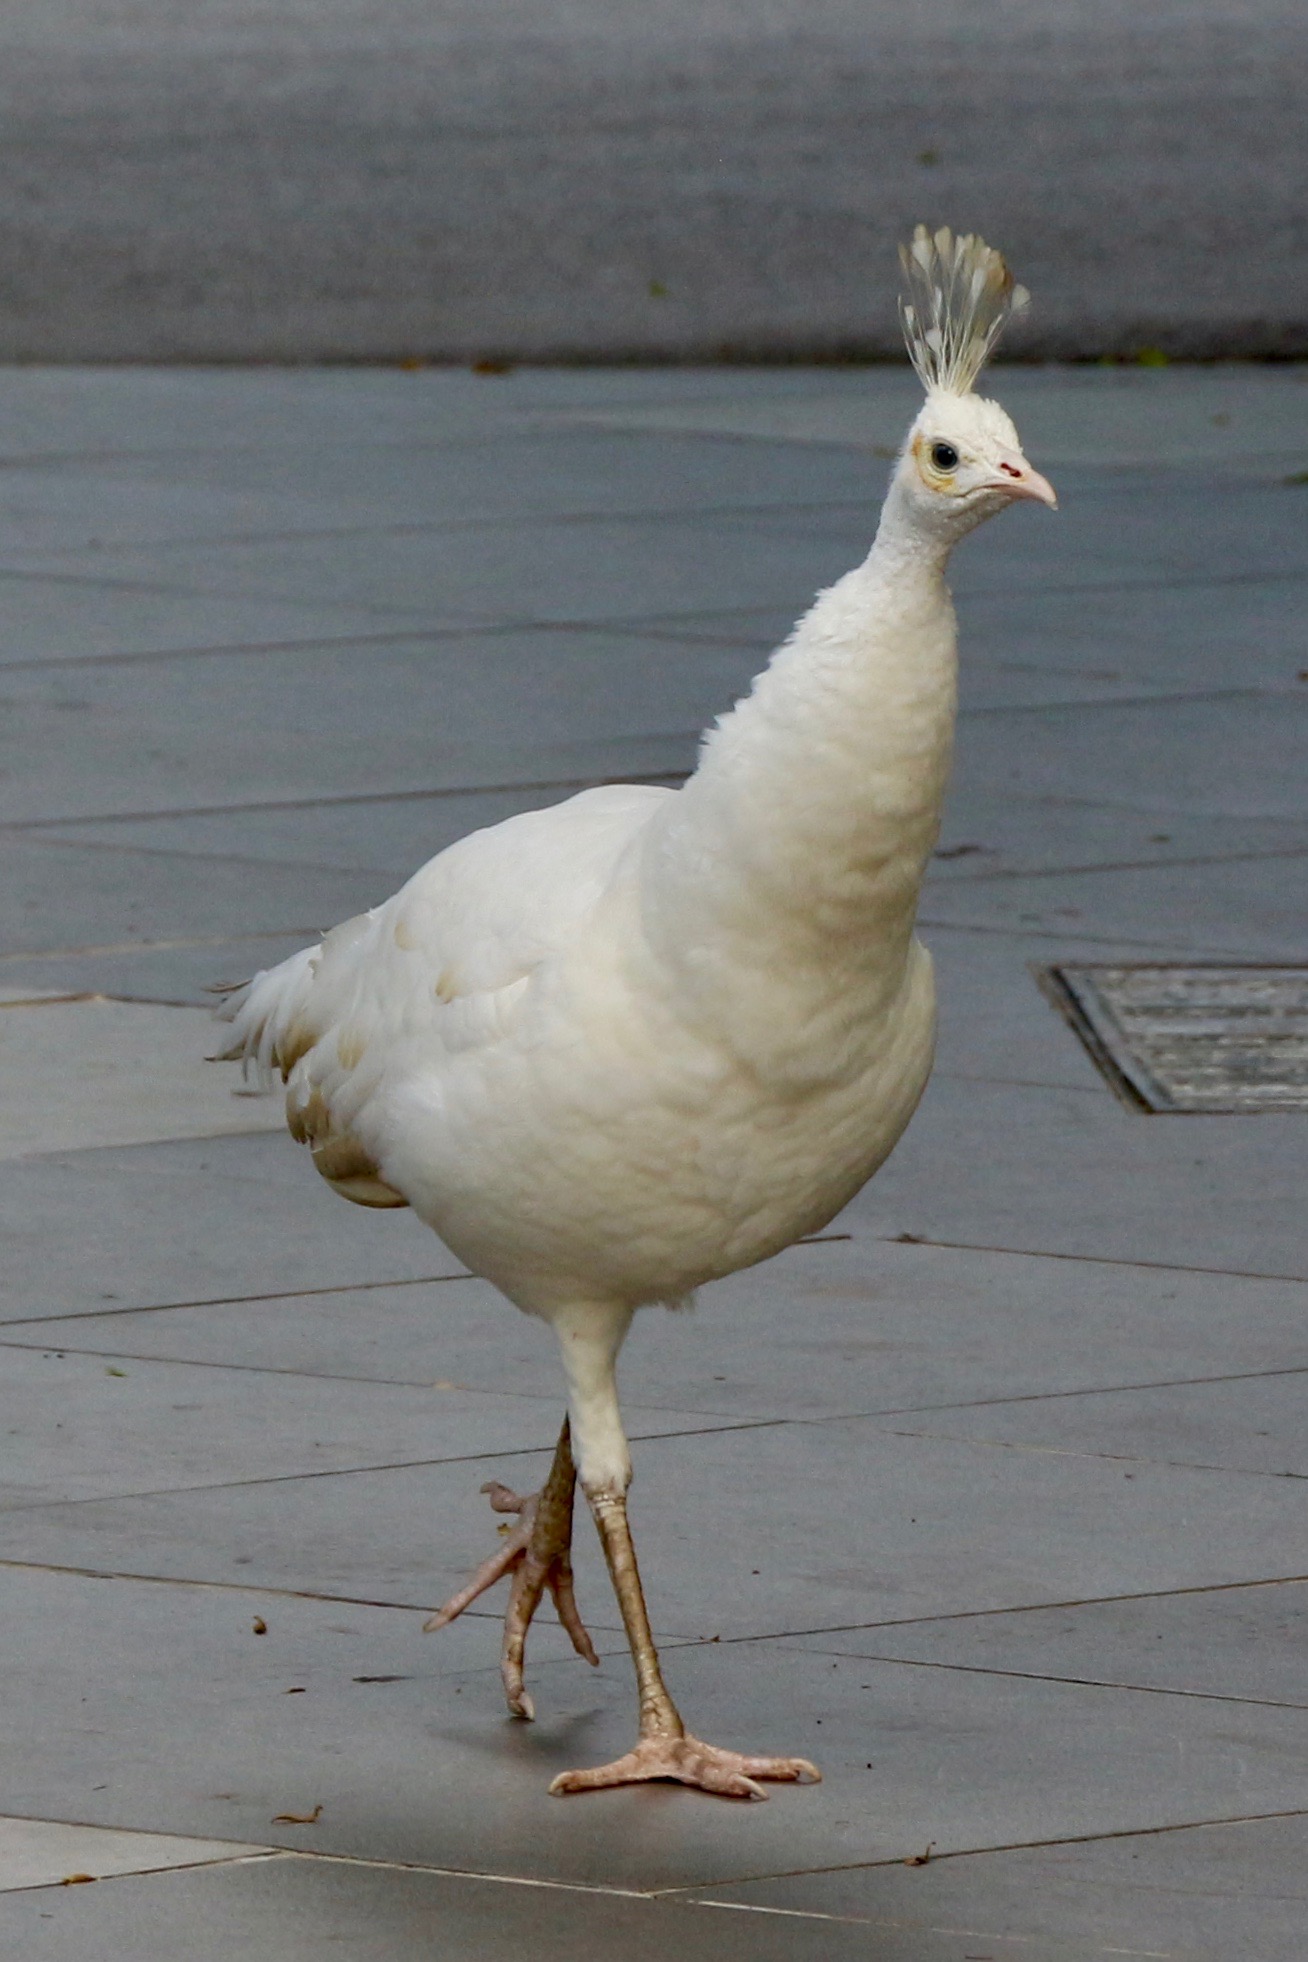 A completely white peafowl strutting on a sidewalk. It is not an albino peafowl but a leucistic one, because its eye colour is dark even though the rest of it is pale due to a lack of pigmentation.
